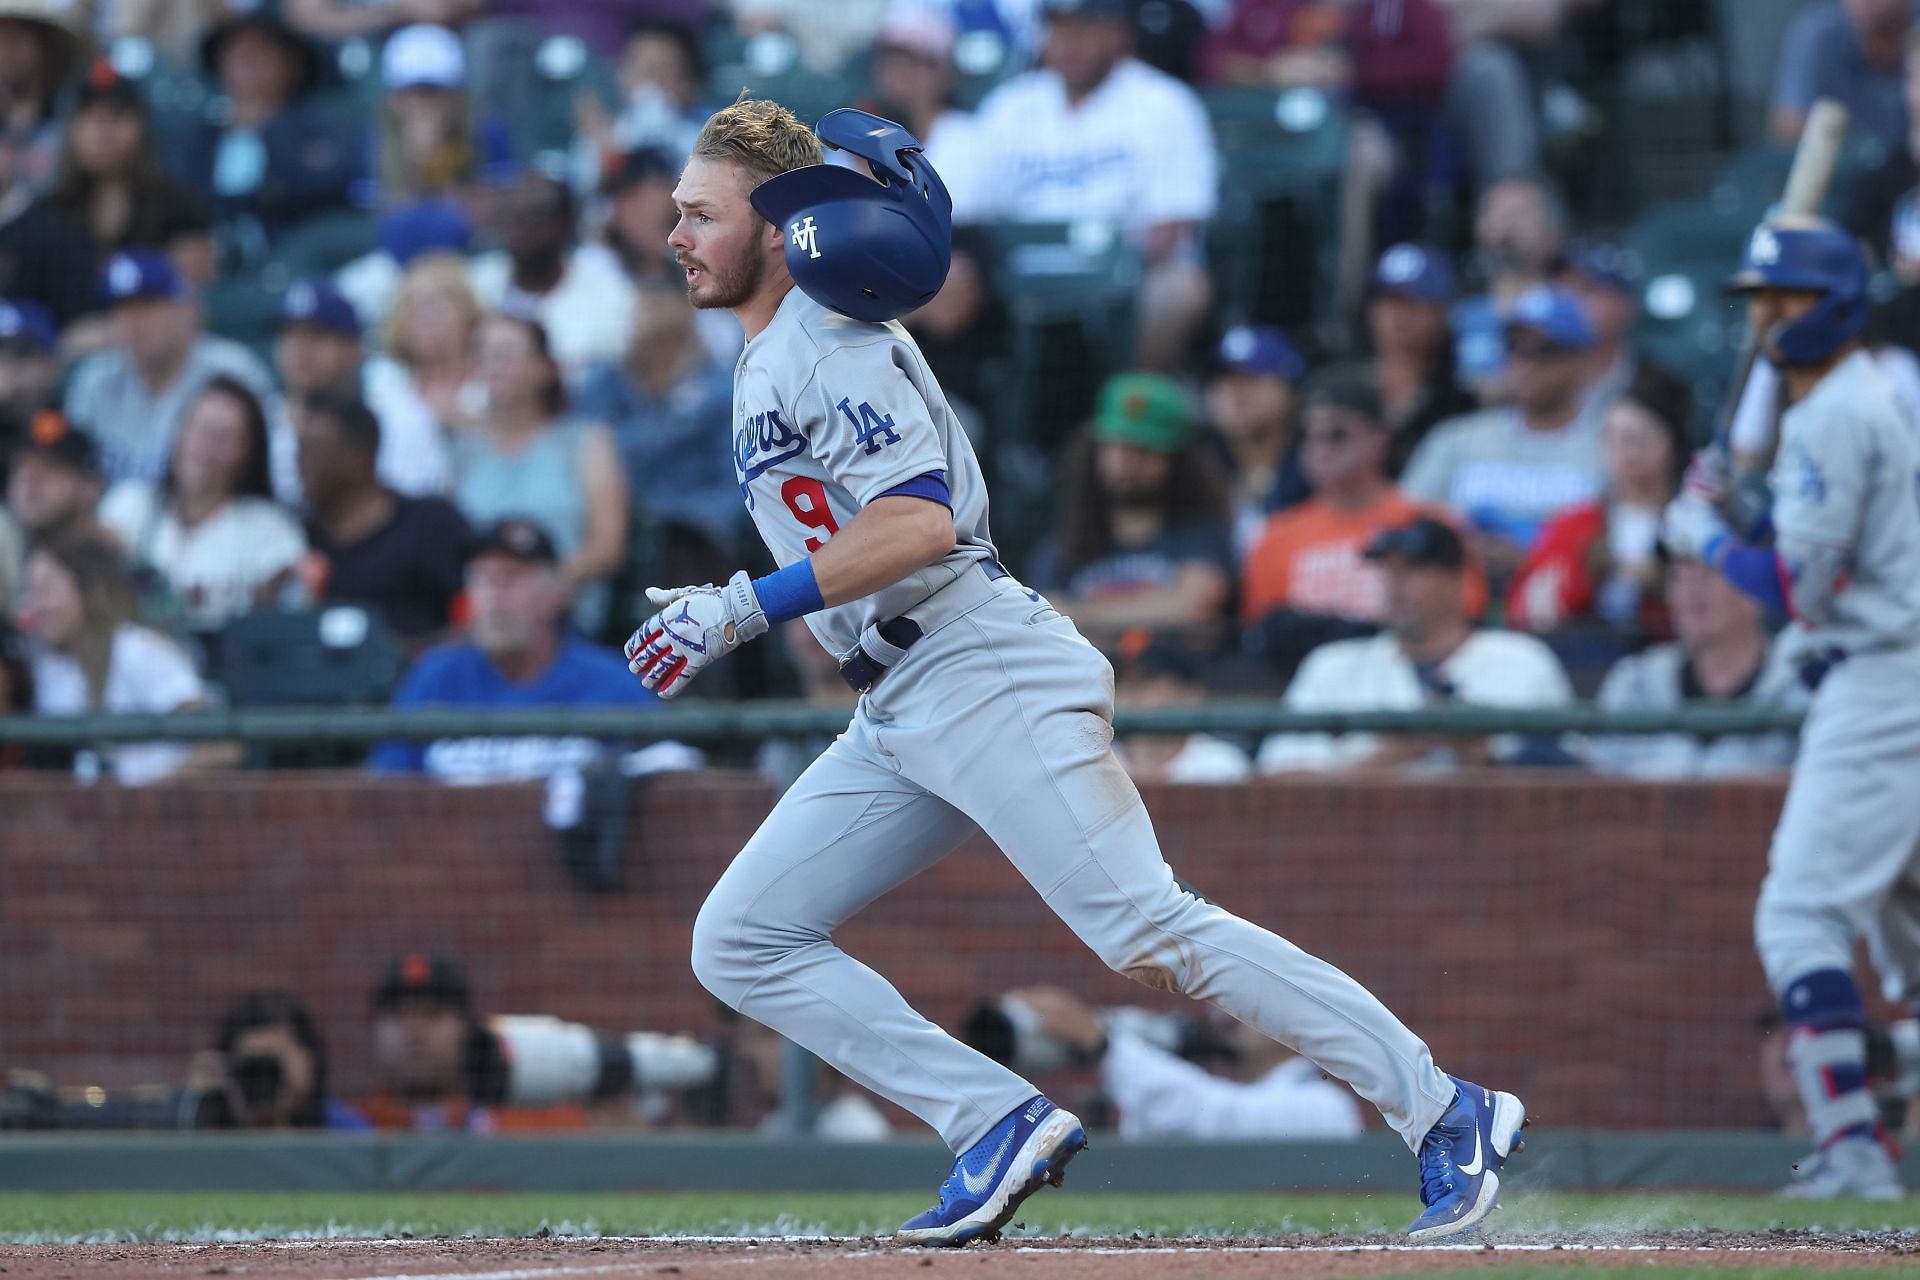 Los Angeles Dodger Gavin Lux hits a single against the San Francisco Giants.